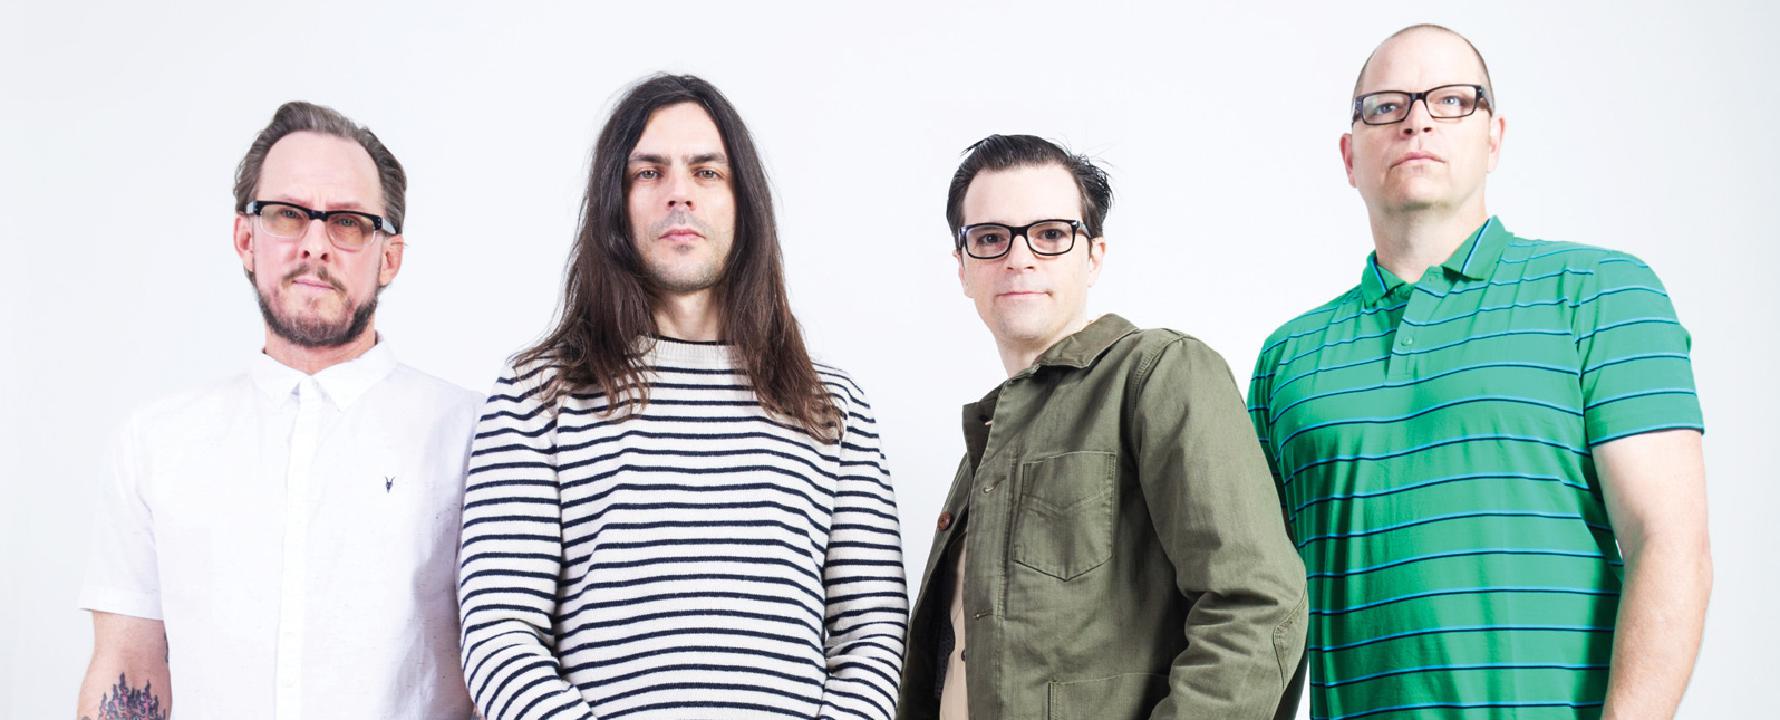 Promotional photograph of Weezer.